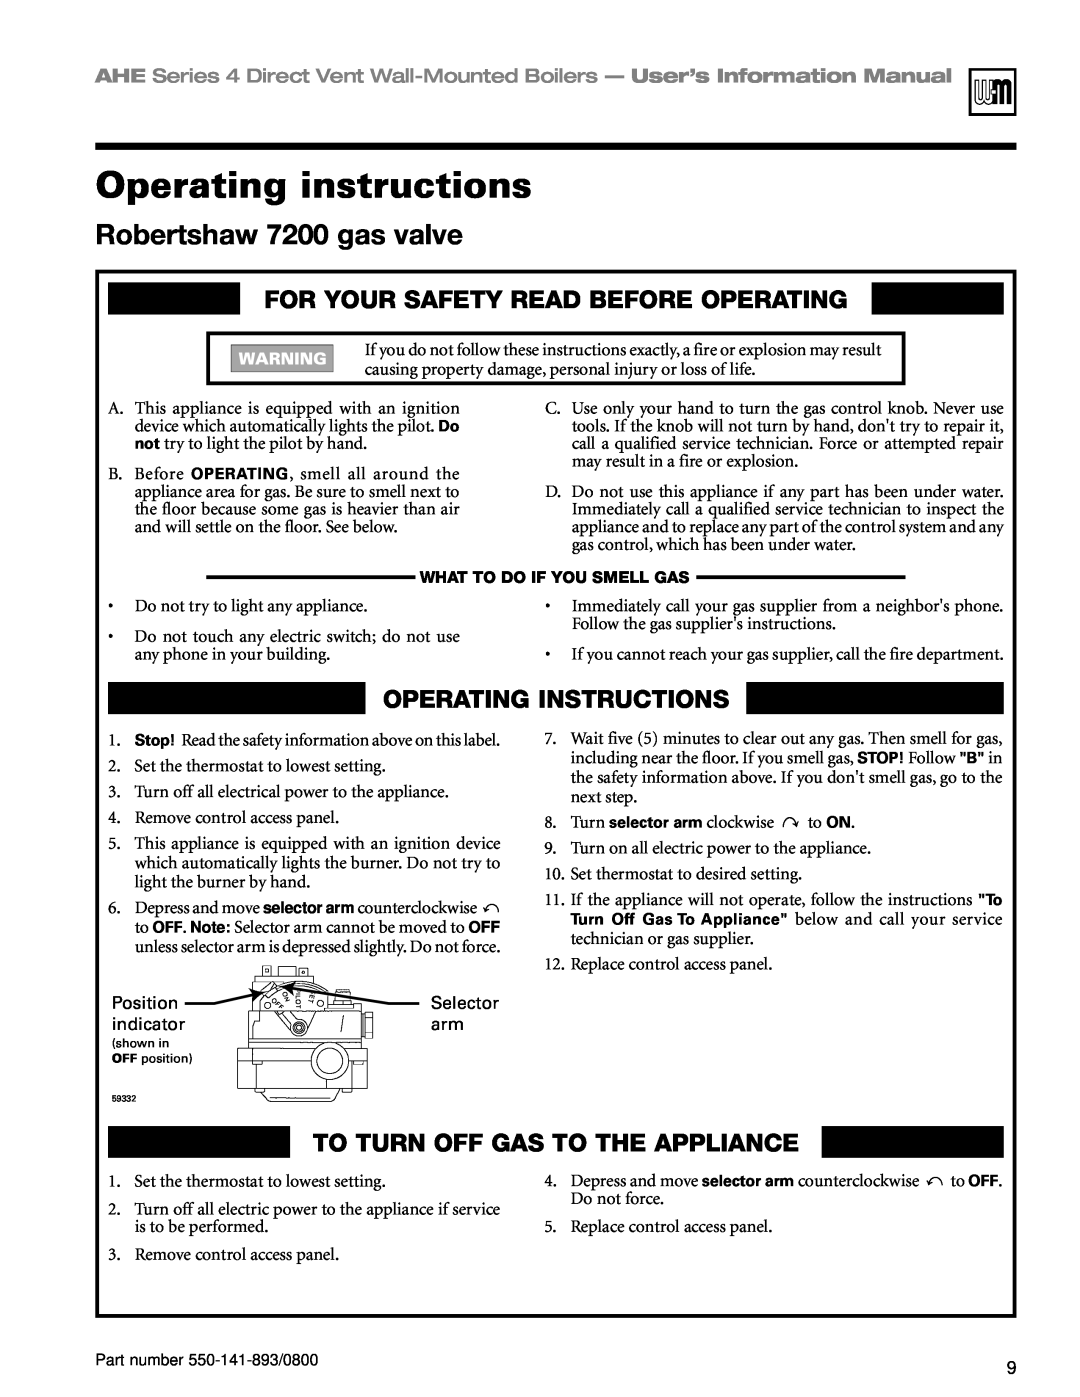 Honeywell Series 4 manual Operating instructions, Robertshaw 7200 gas valve, For Your Safety Read Before Operating 